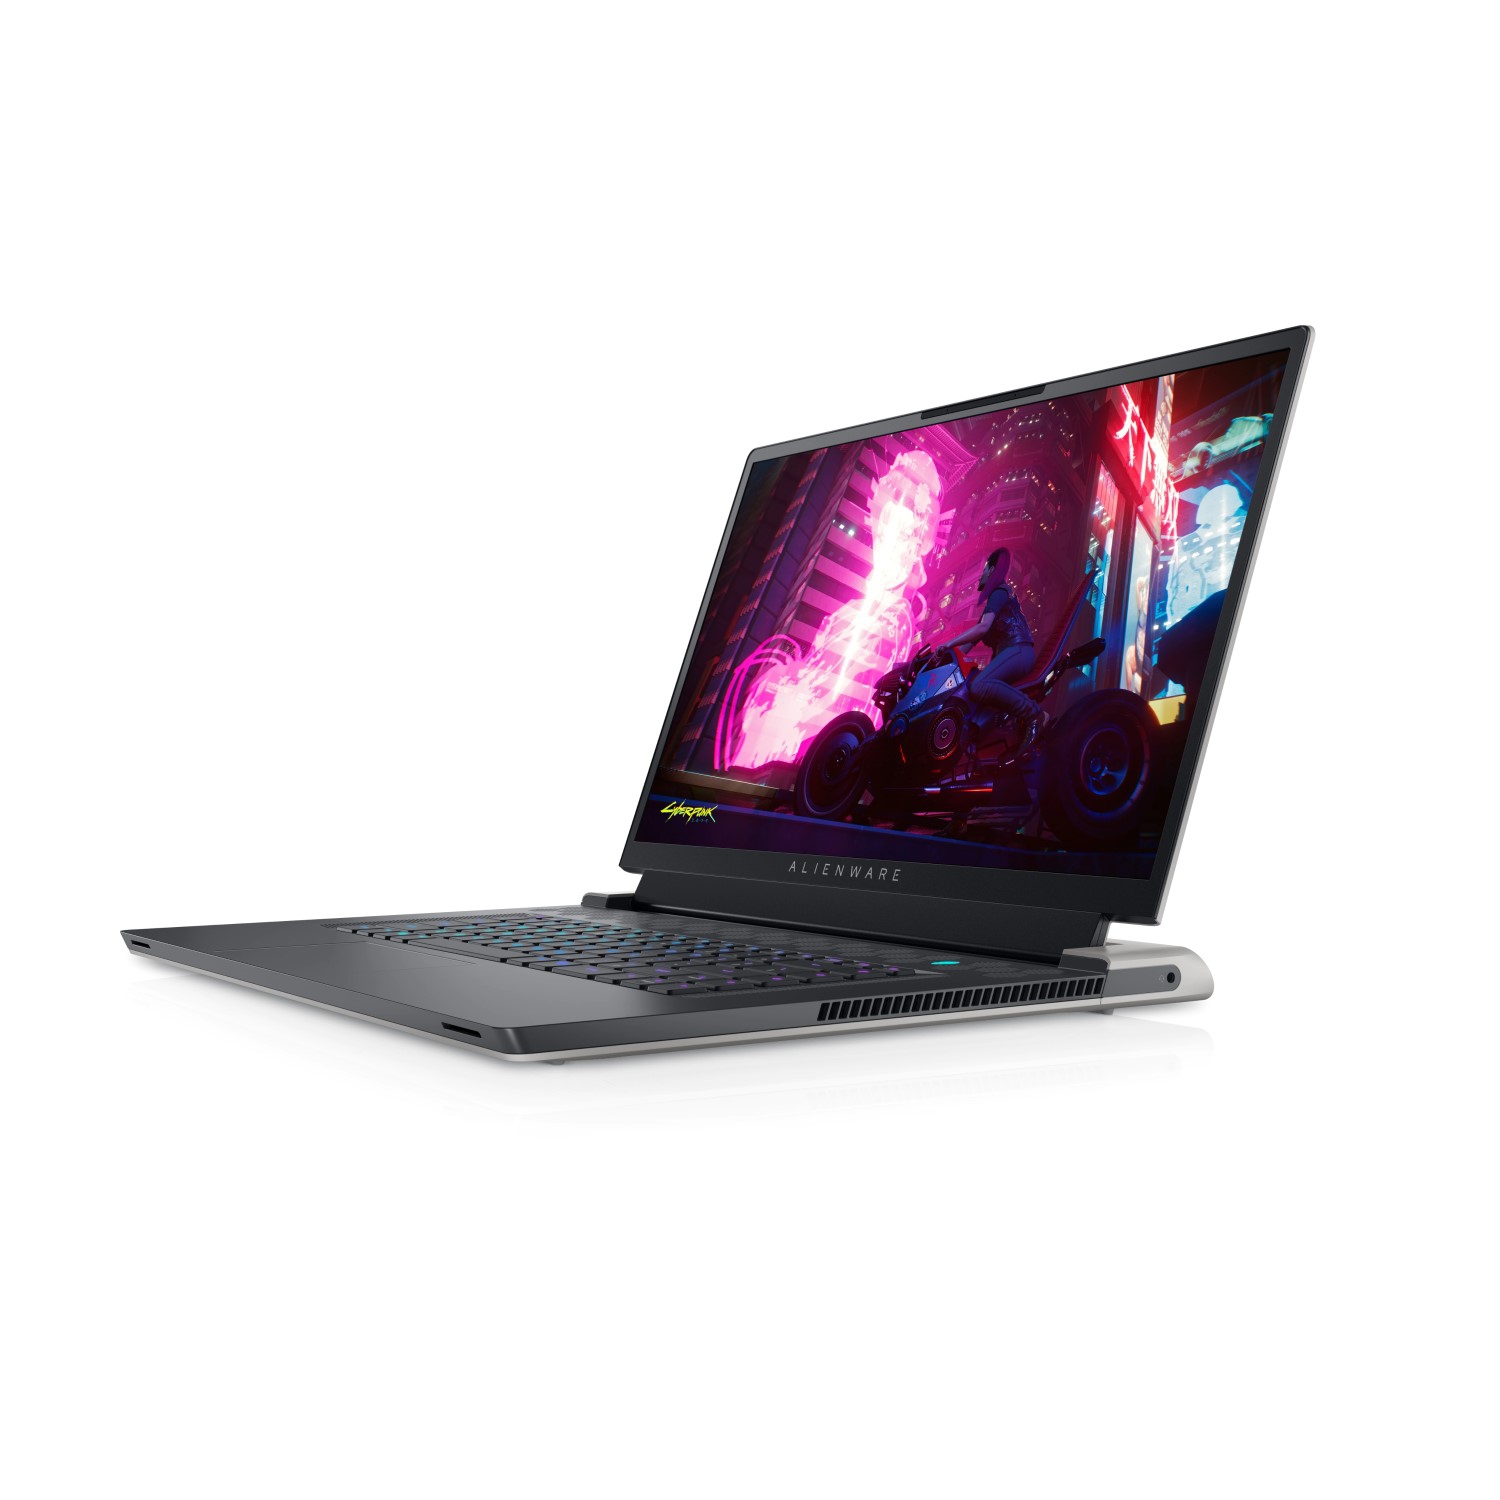 Refurbished (Excellent) - Alienware X17 R1, 17" UHD 120Hz, Nvidia RTX 3080, i7-11800H, 16GB RAM, 1TB SSD, WIN10 HOME, Certified Refurbished